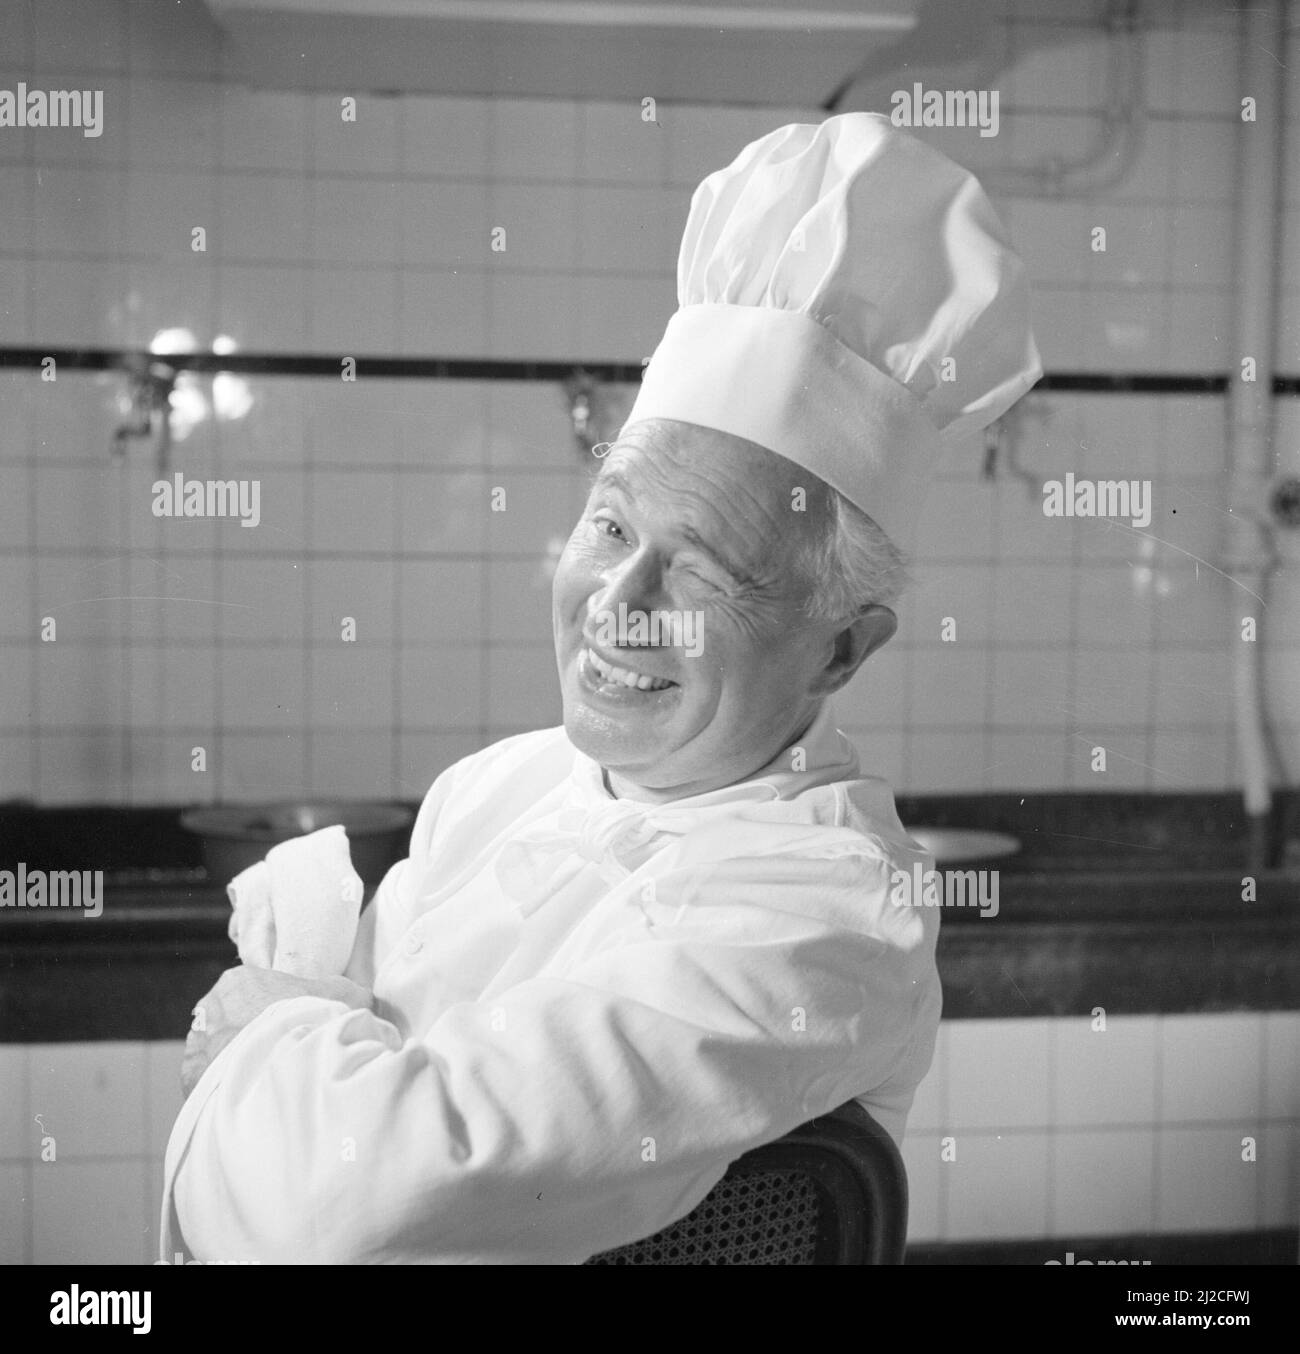 1950s smiling chef in a large kitchen ca: June 26, 1954 Stock Photo